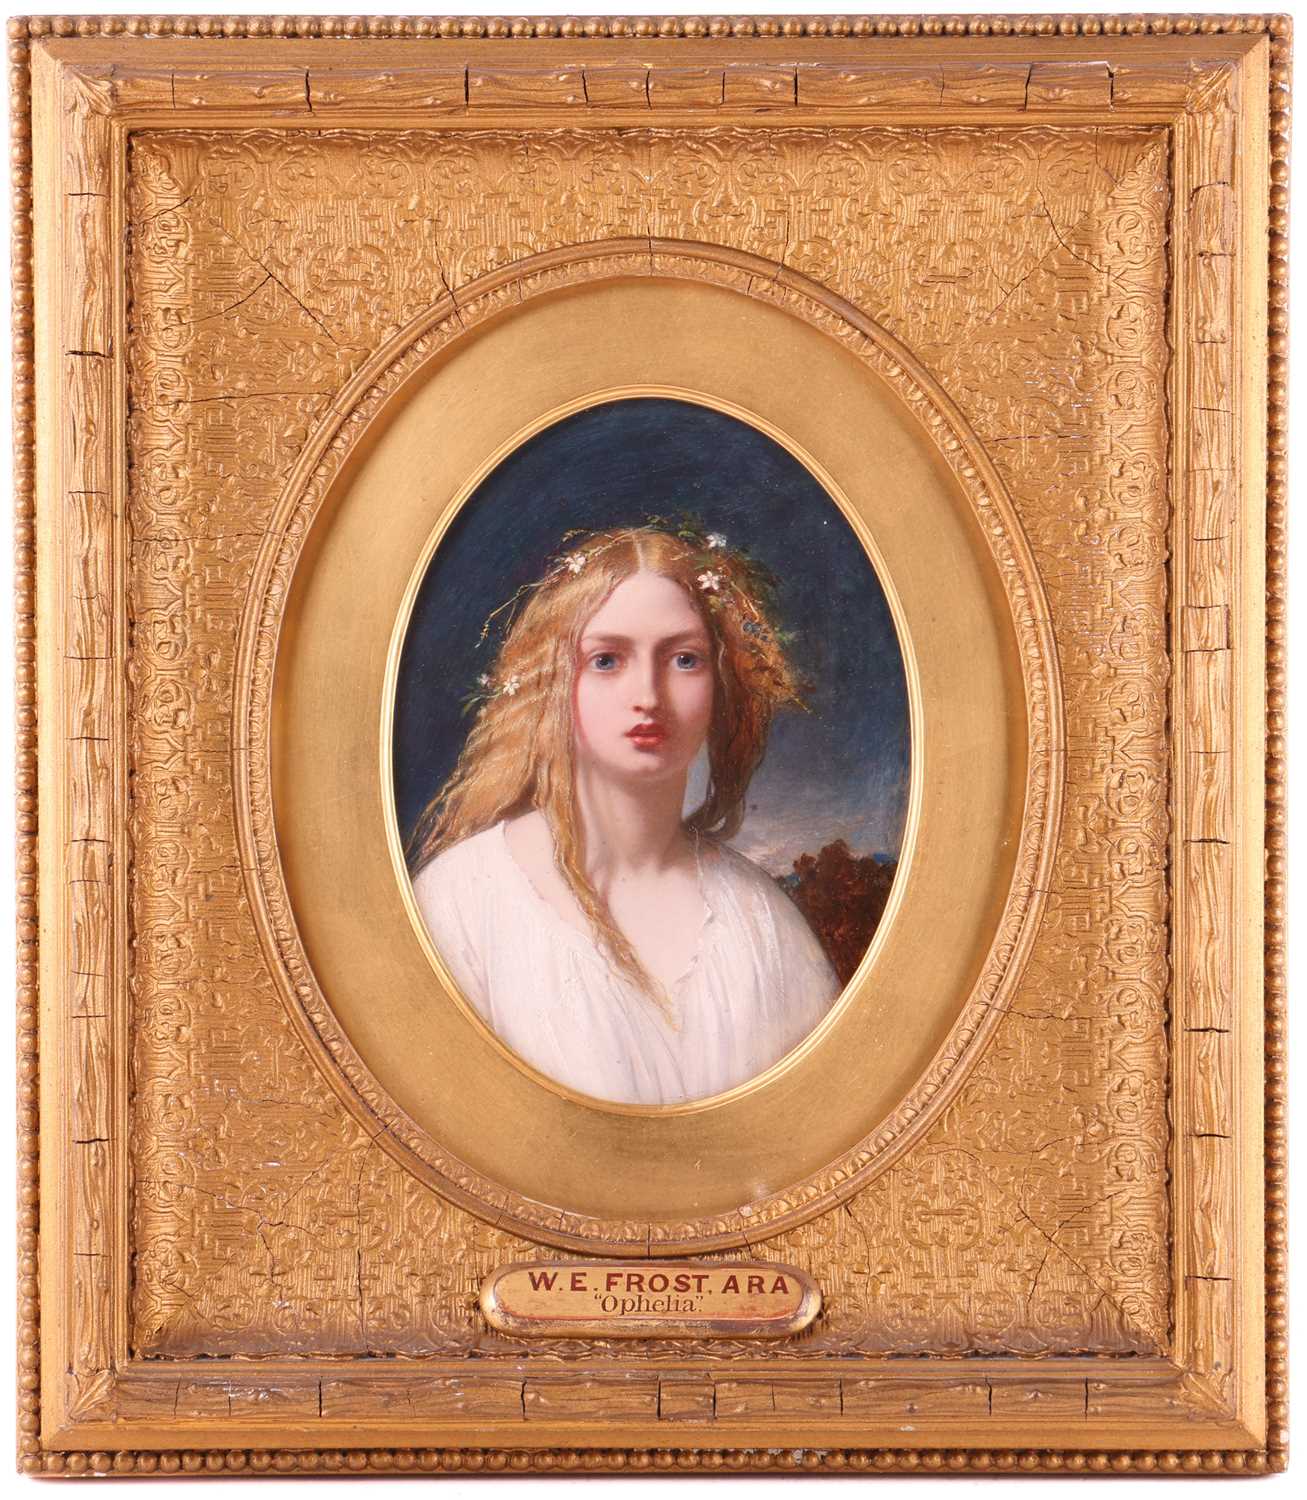 William Edward Frost (1810 - 1877), signed and dated 1853 verso, Ophelia, oil on panel, 20cm x 15cm, - Image 2 of 11